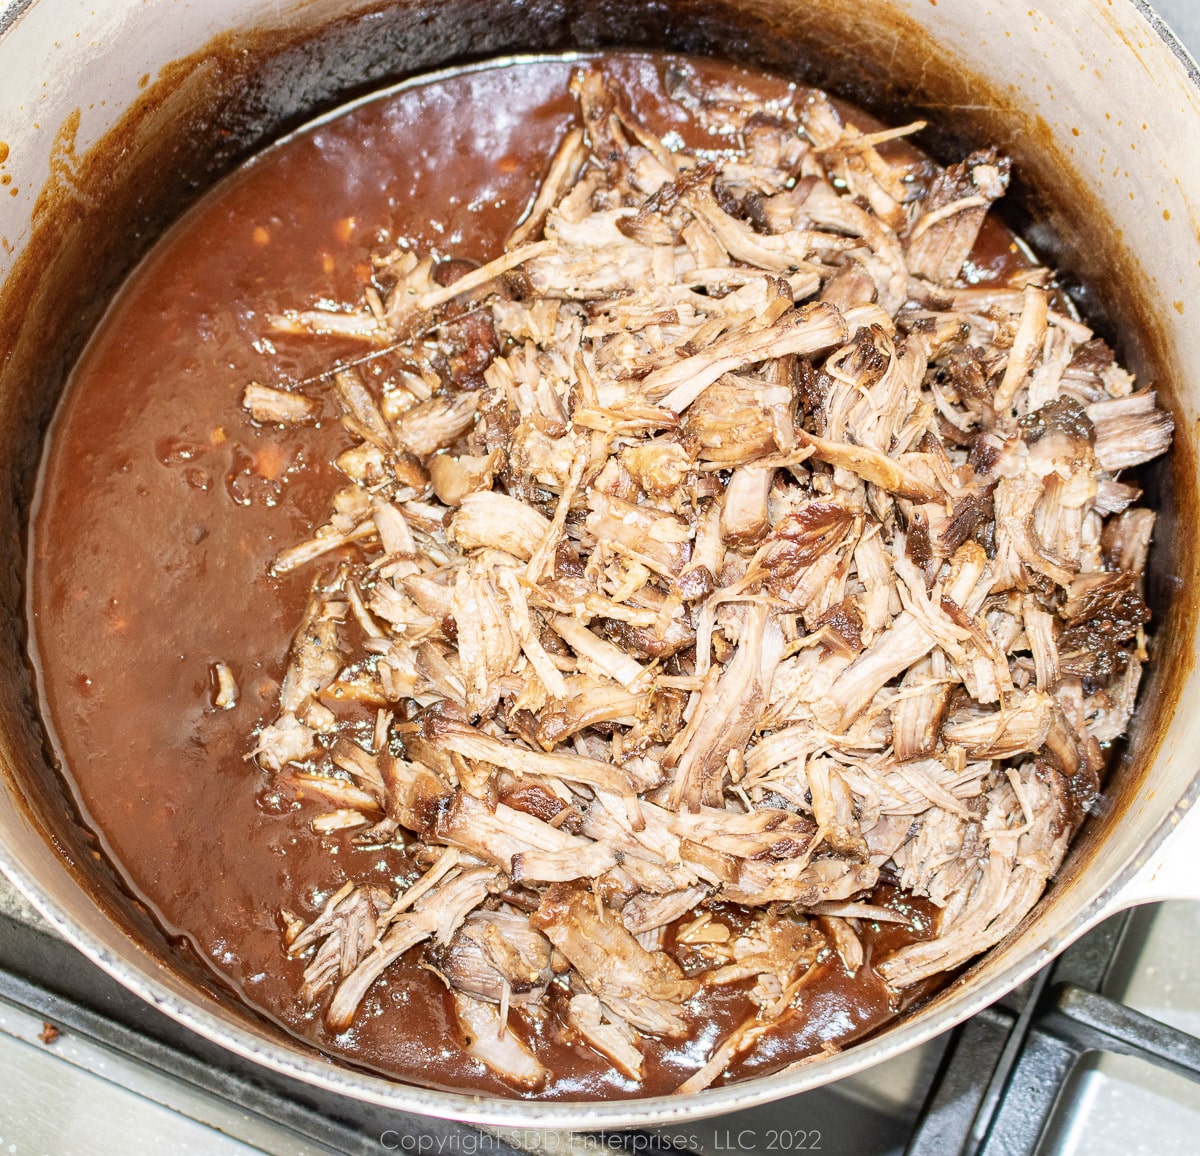 shredded eef added to bbq sauce in a Dutch oven